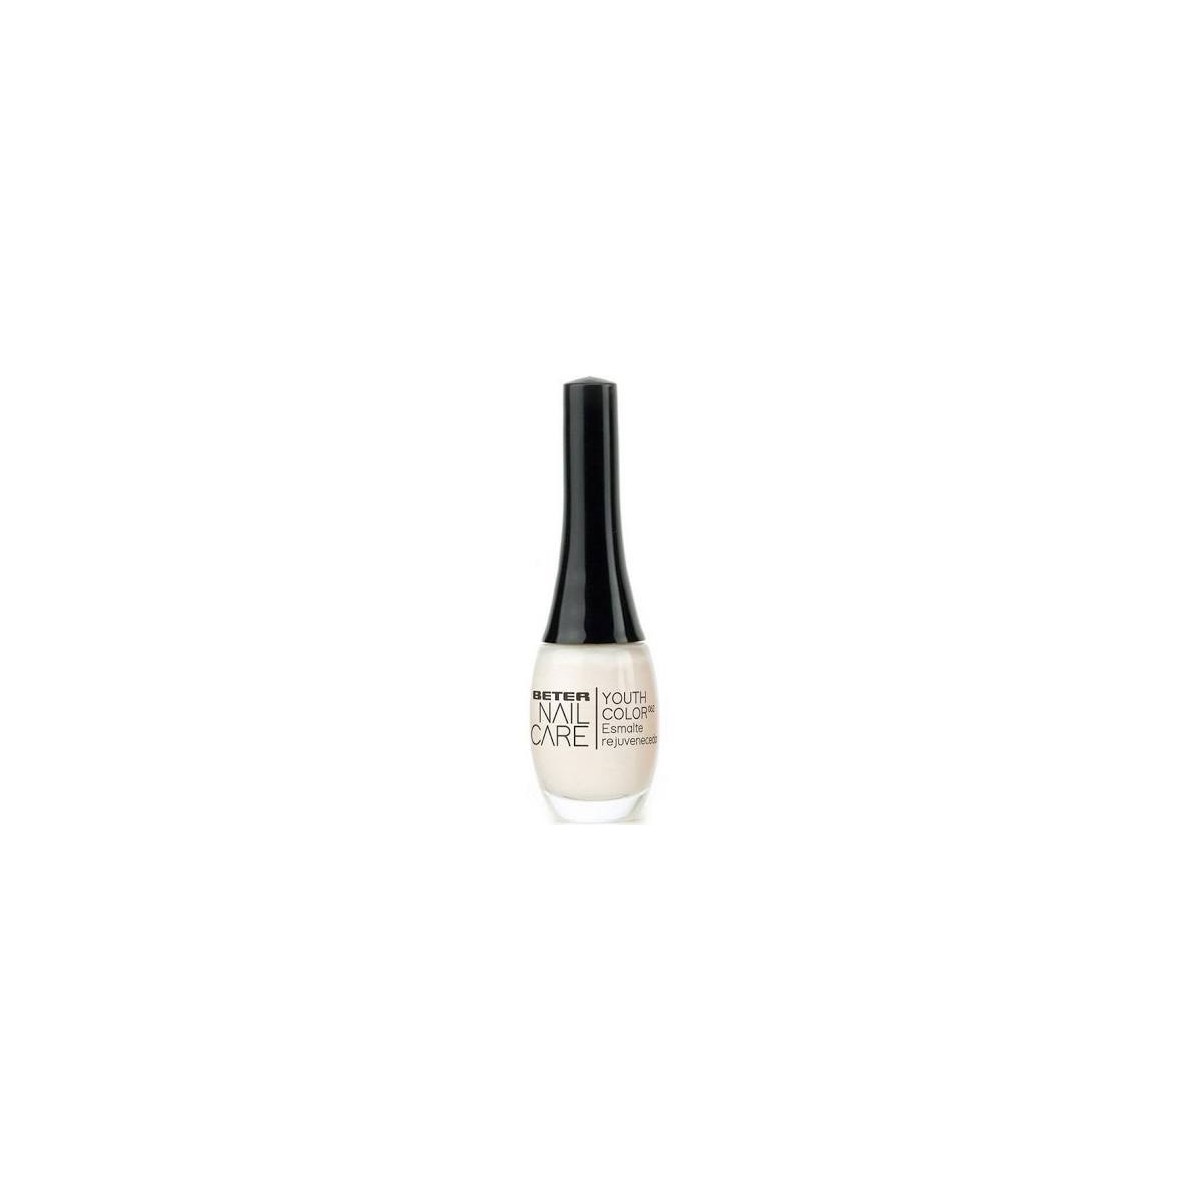 nail-care-youth-color-62-beige-french-manicure-beter